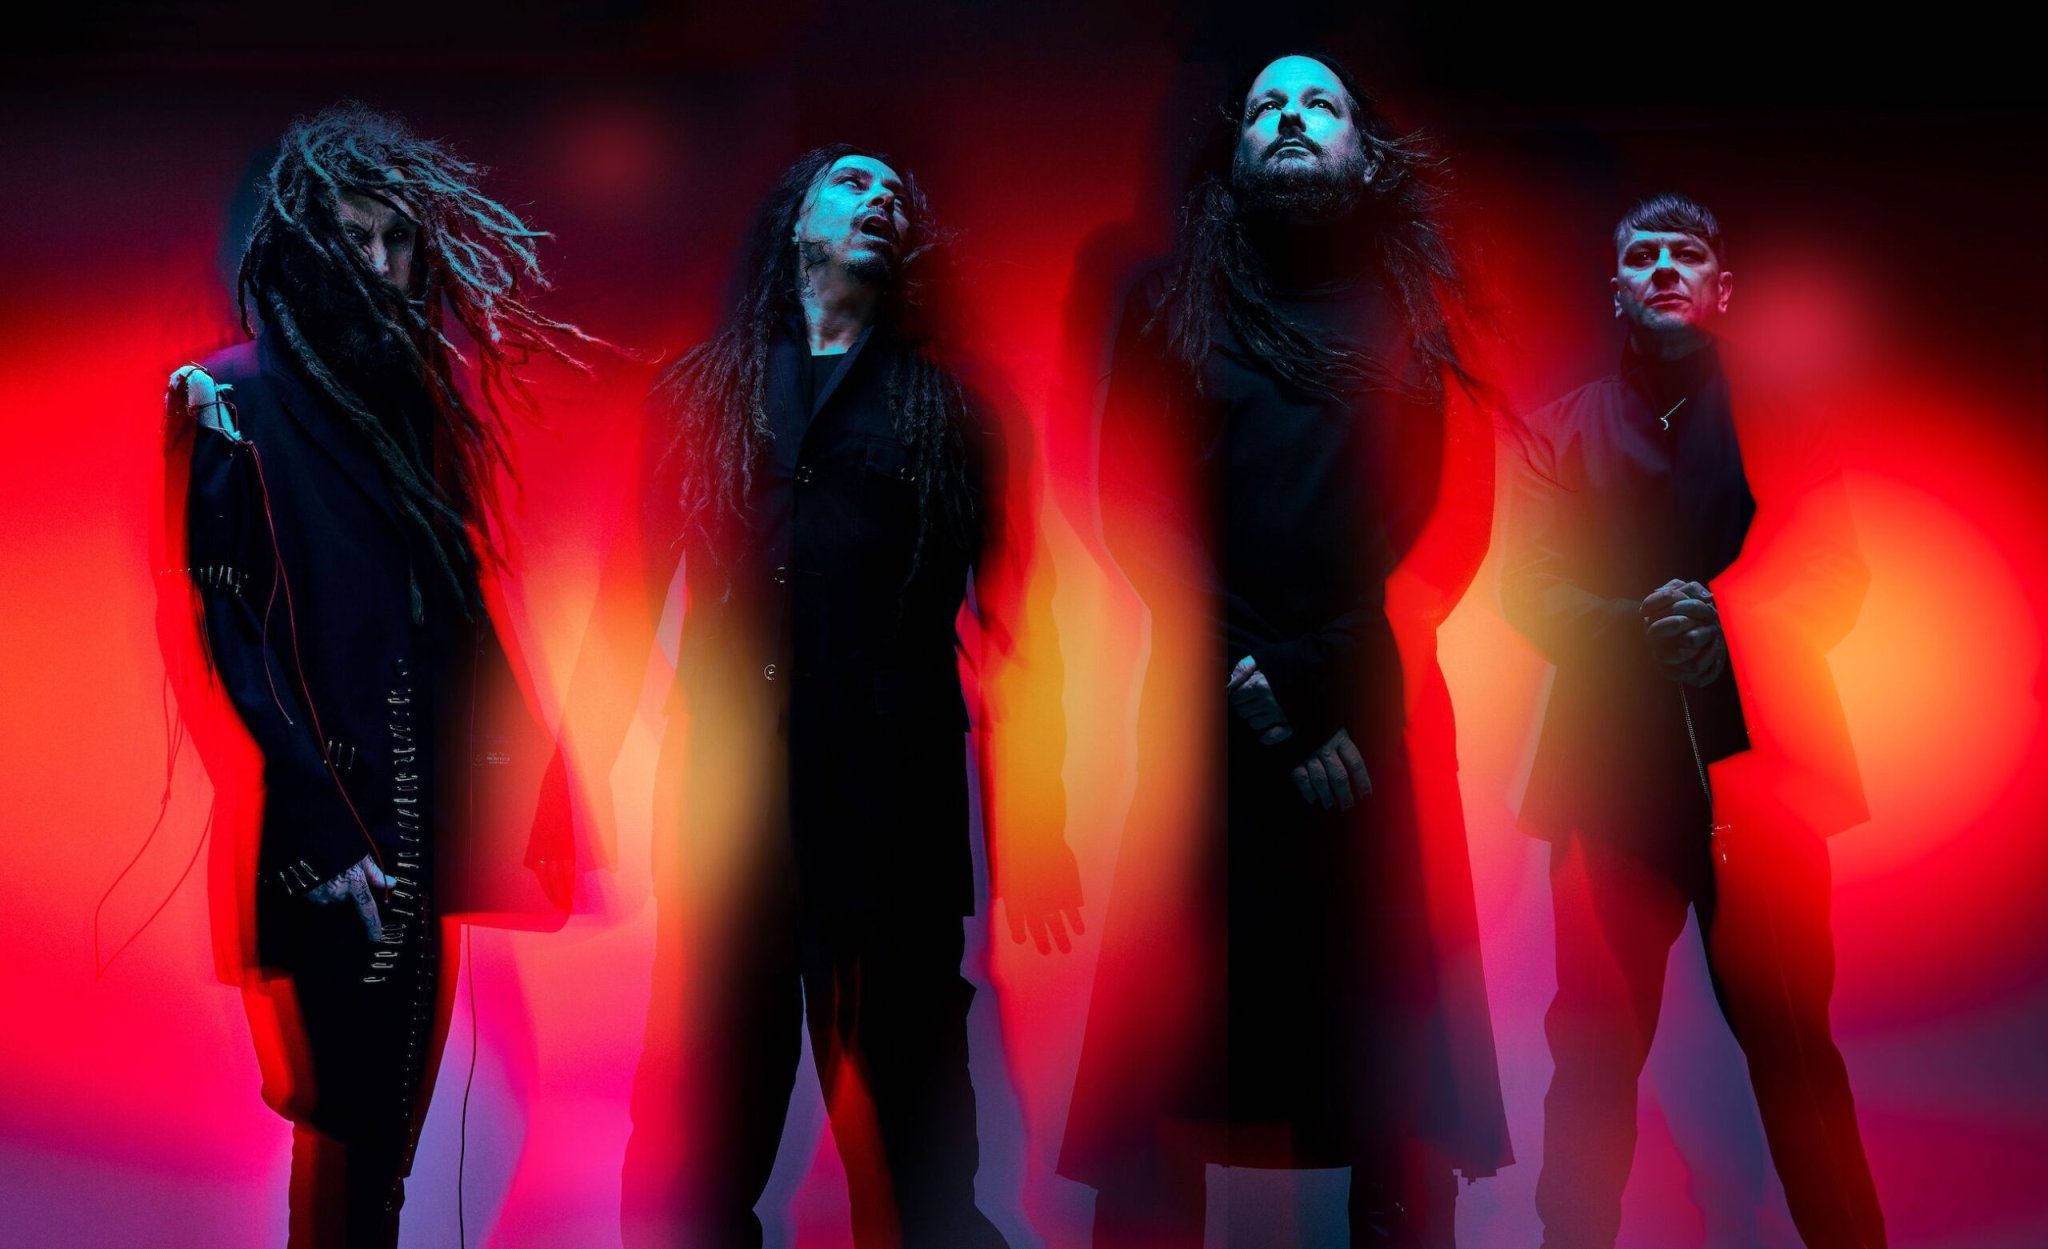 Reclaim My Place - Korn Embrace New Family Values on Requiem